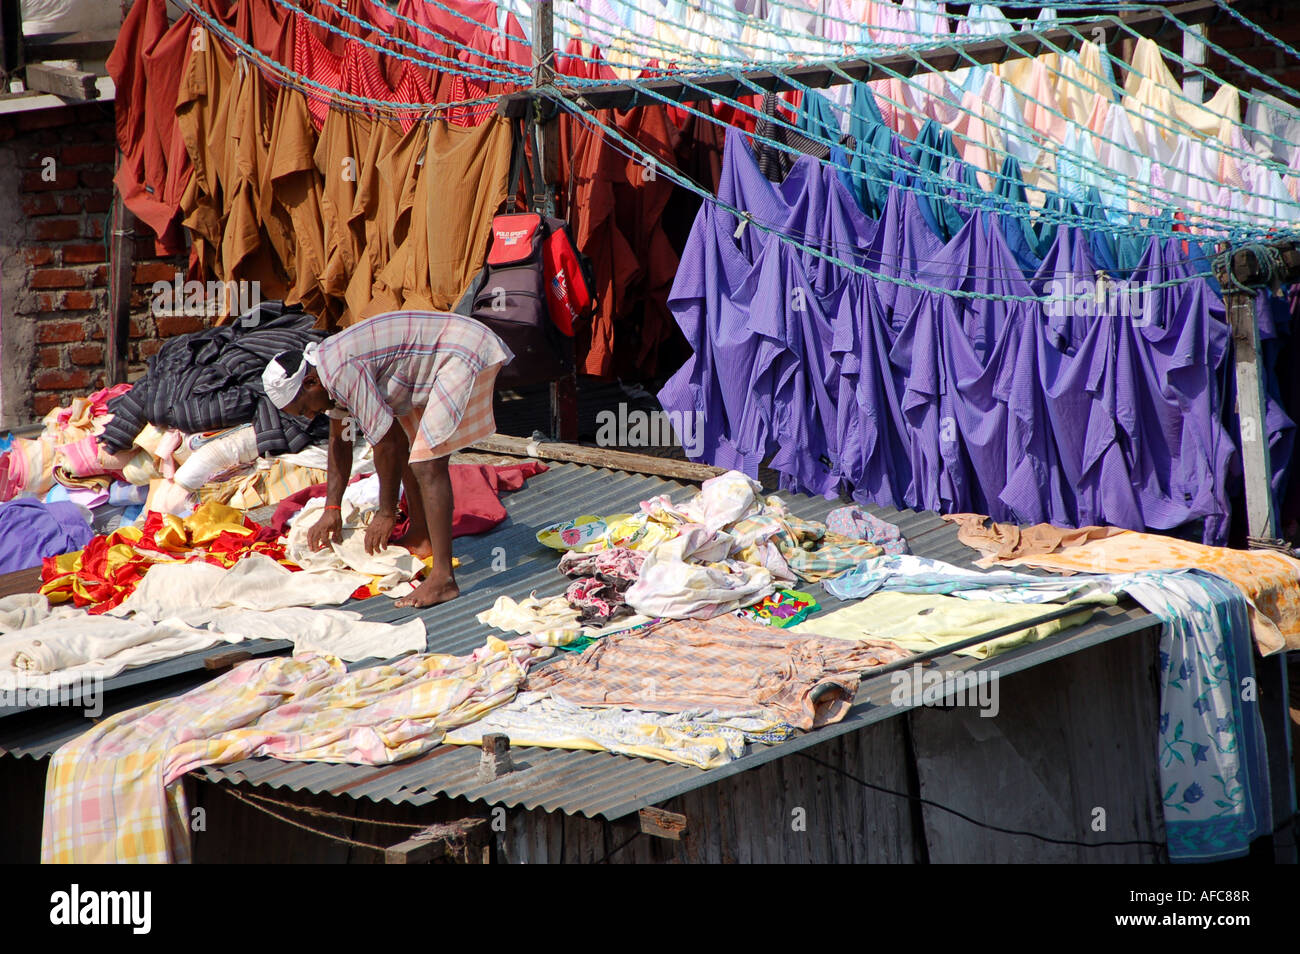 Washed clothes hung out to dry at Dhobi Ghat in Mumbai, India Stock Photo